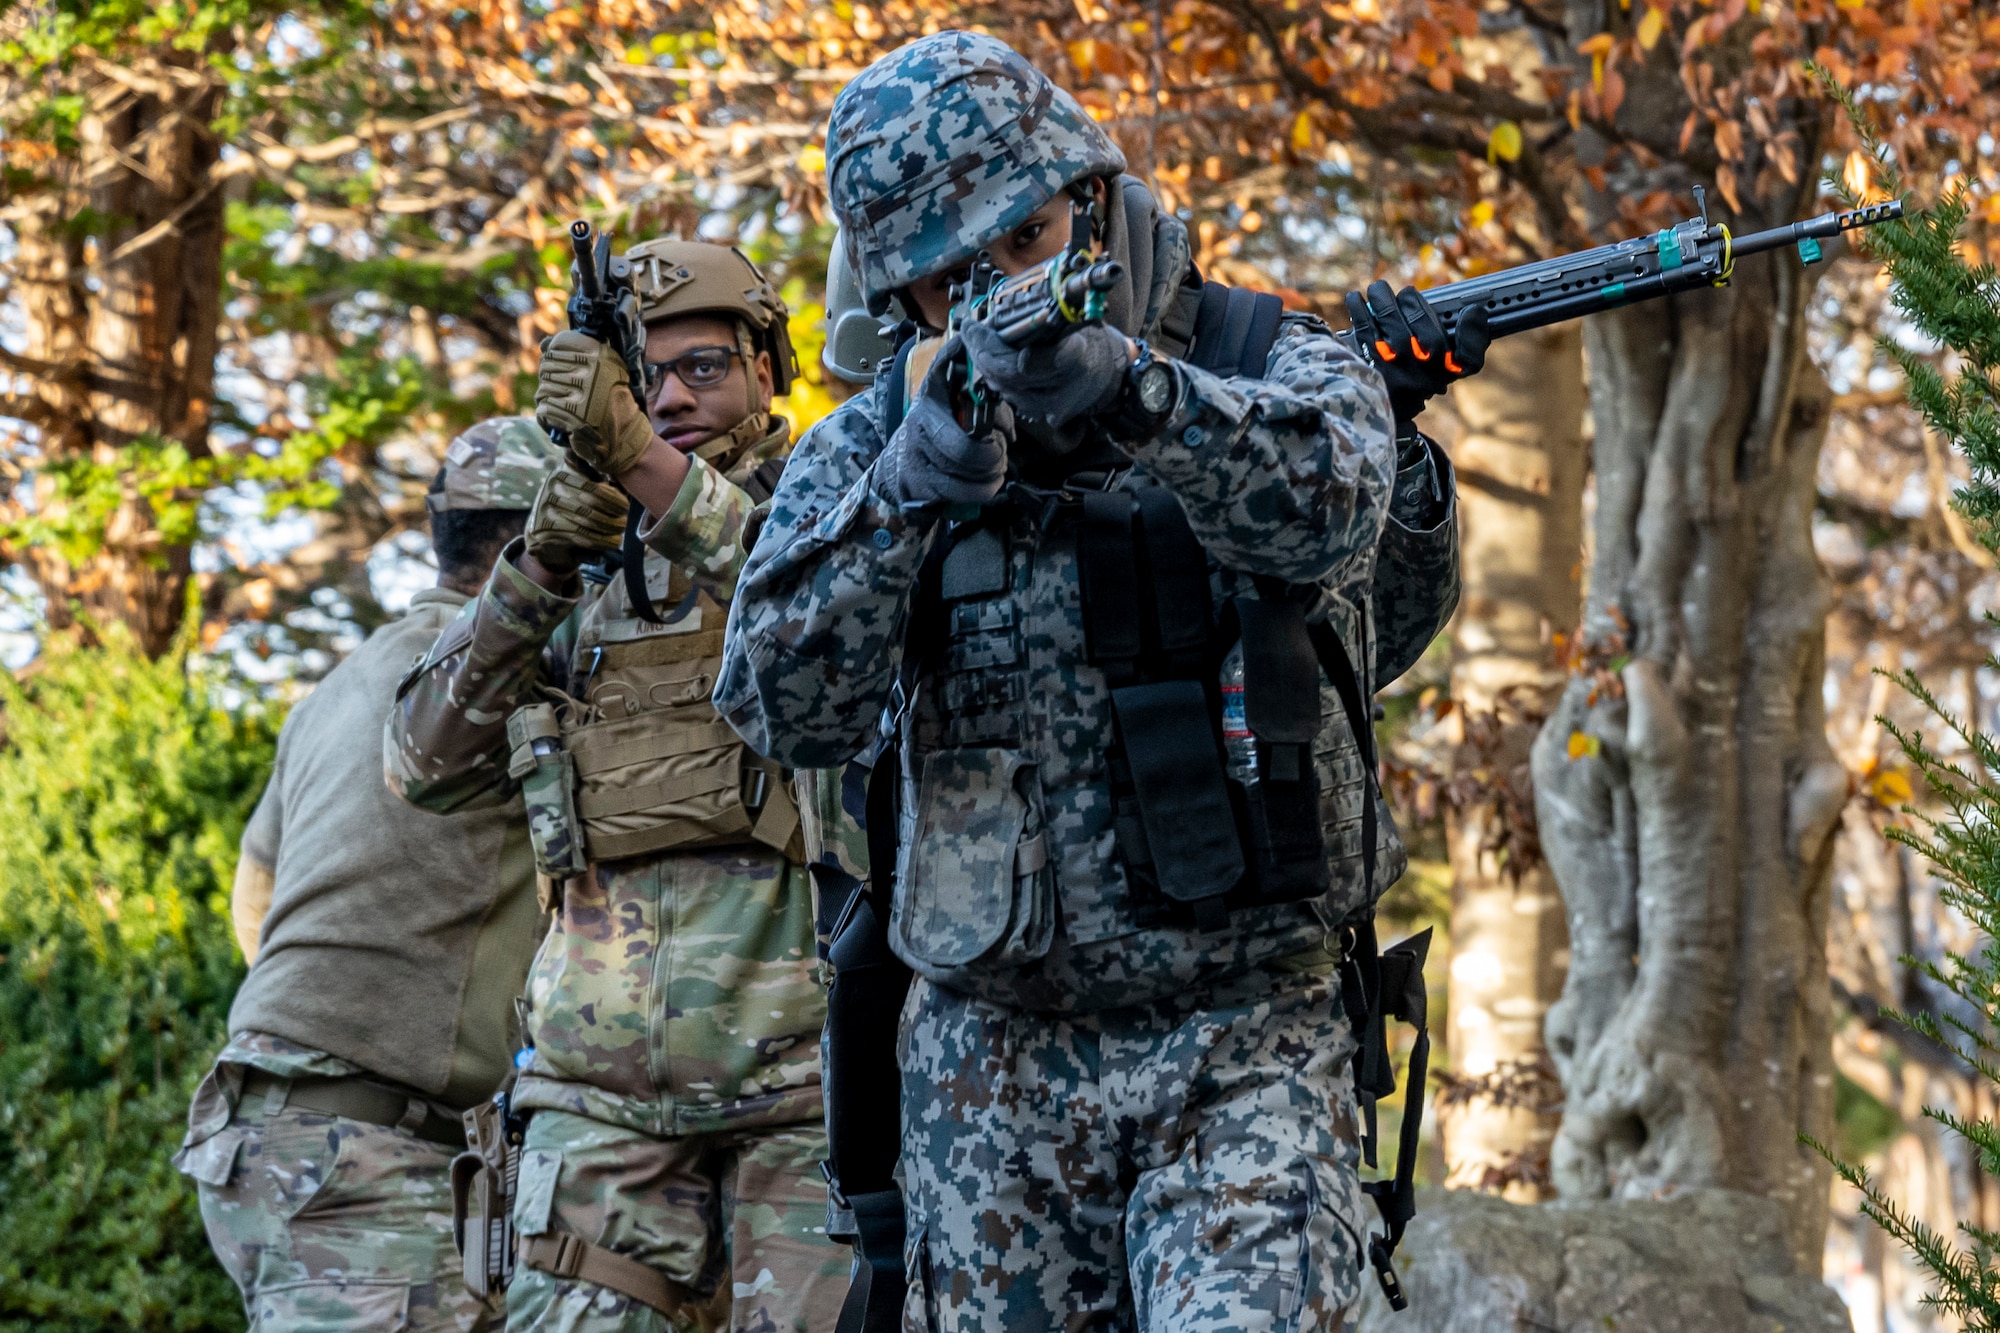 U.S. and Japanese service members preform tactical movements during a training.